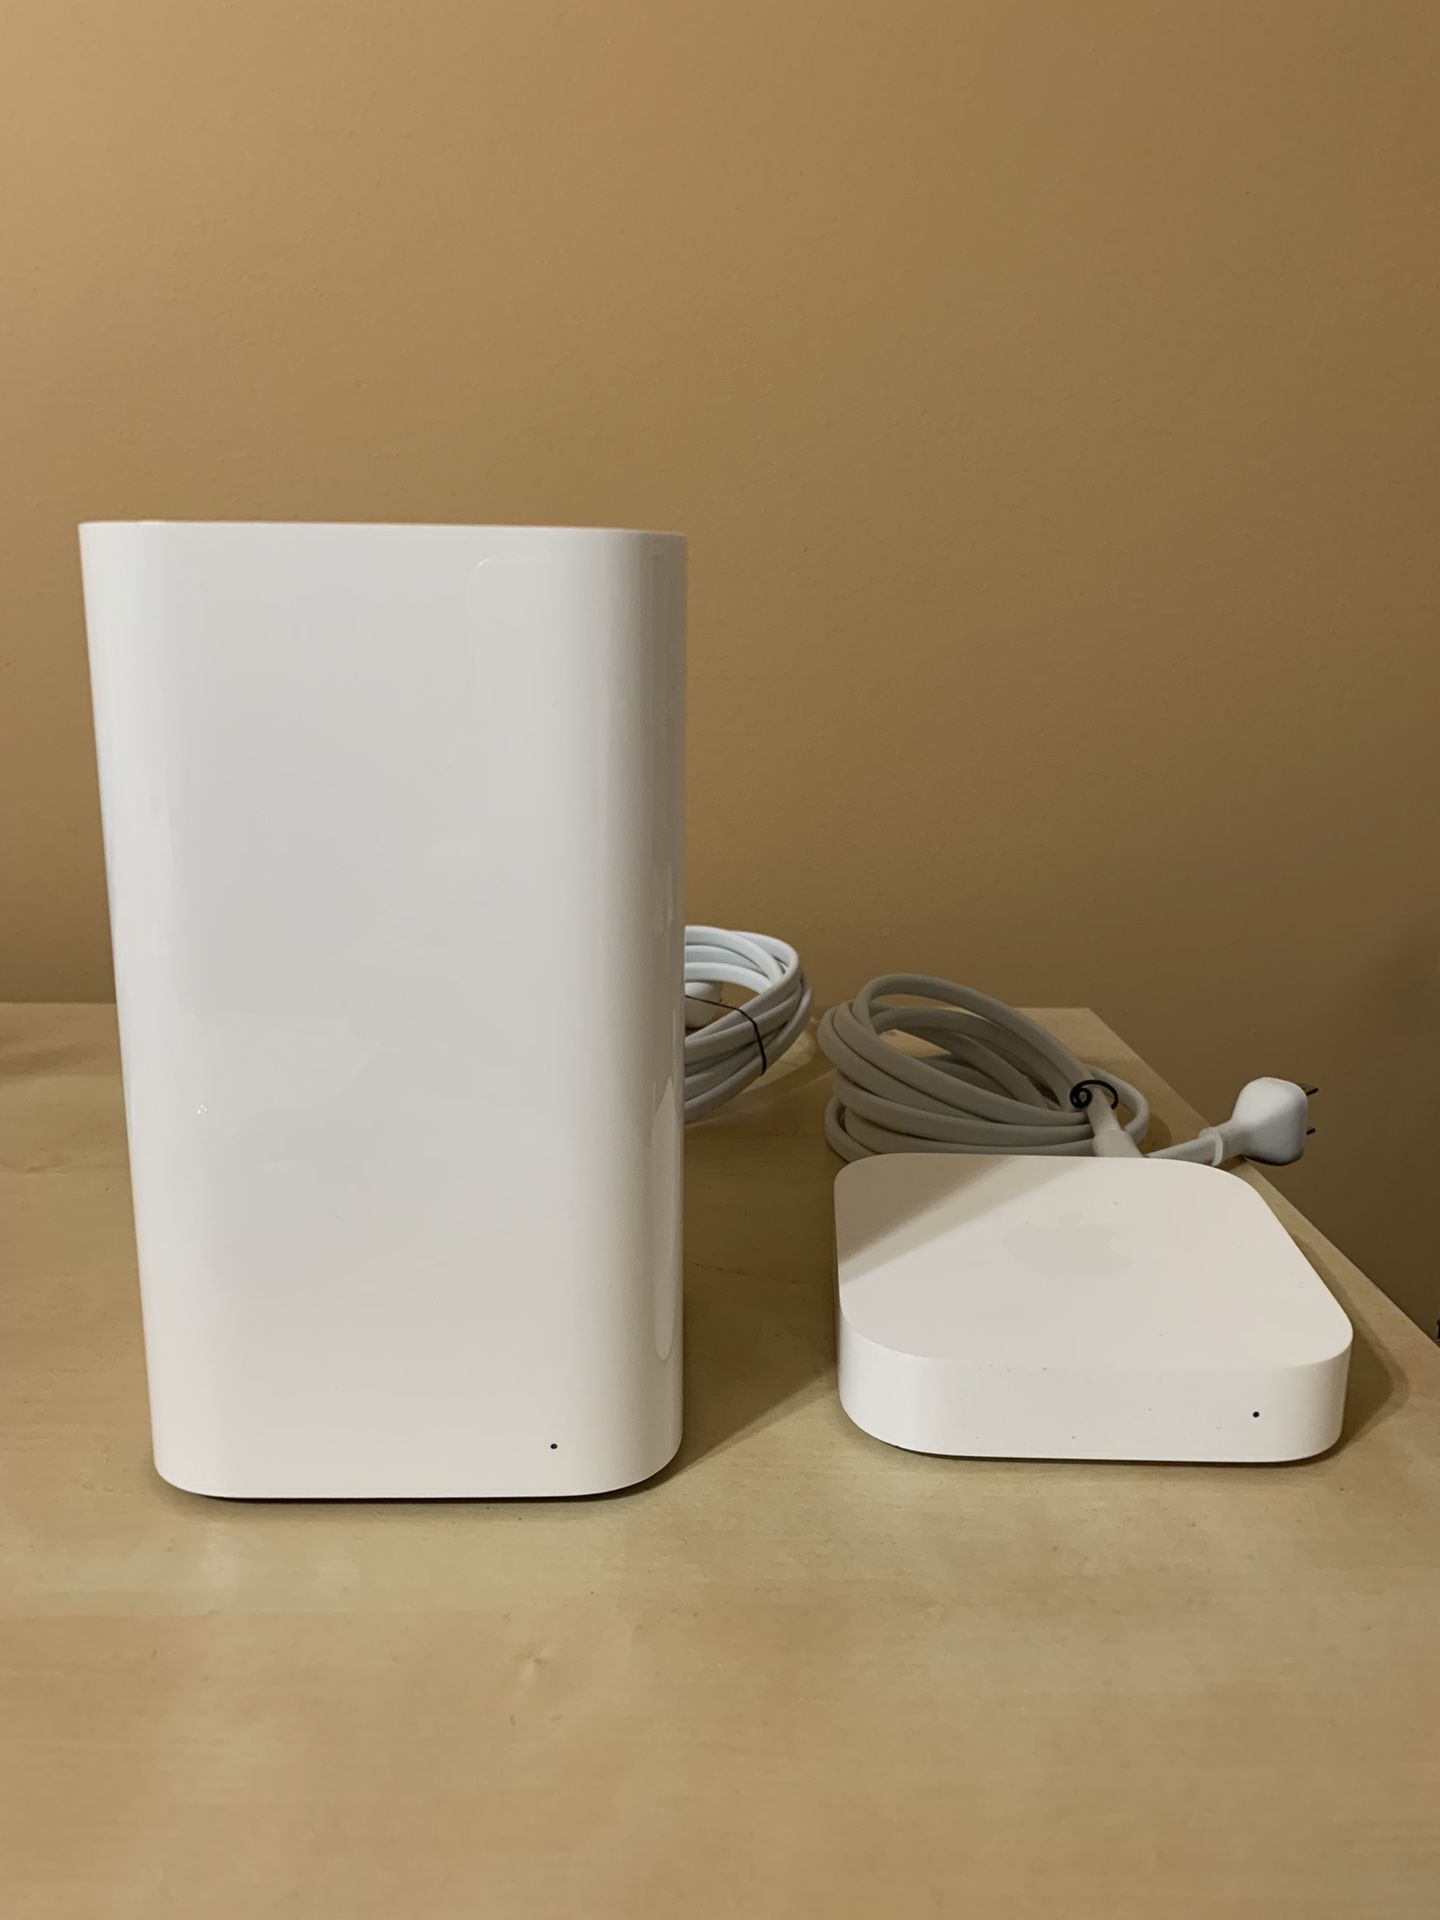 Airport Extreme & Airport Expess - Apple Routers